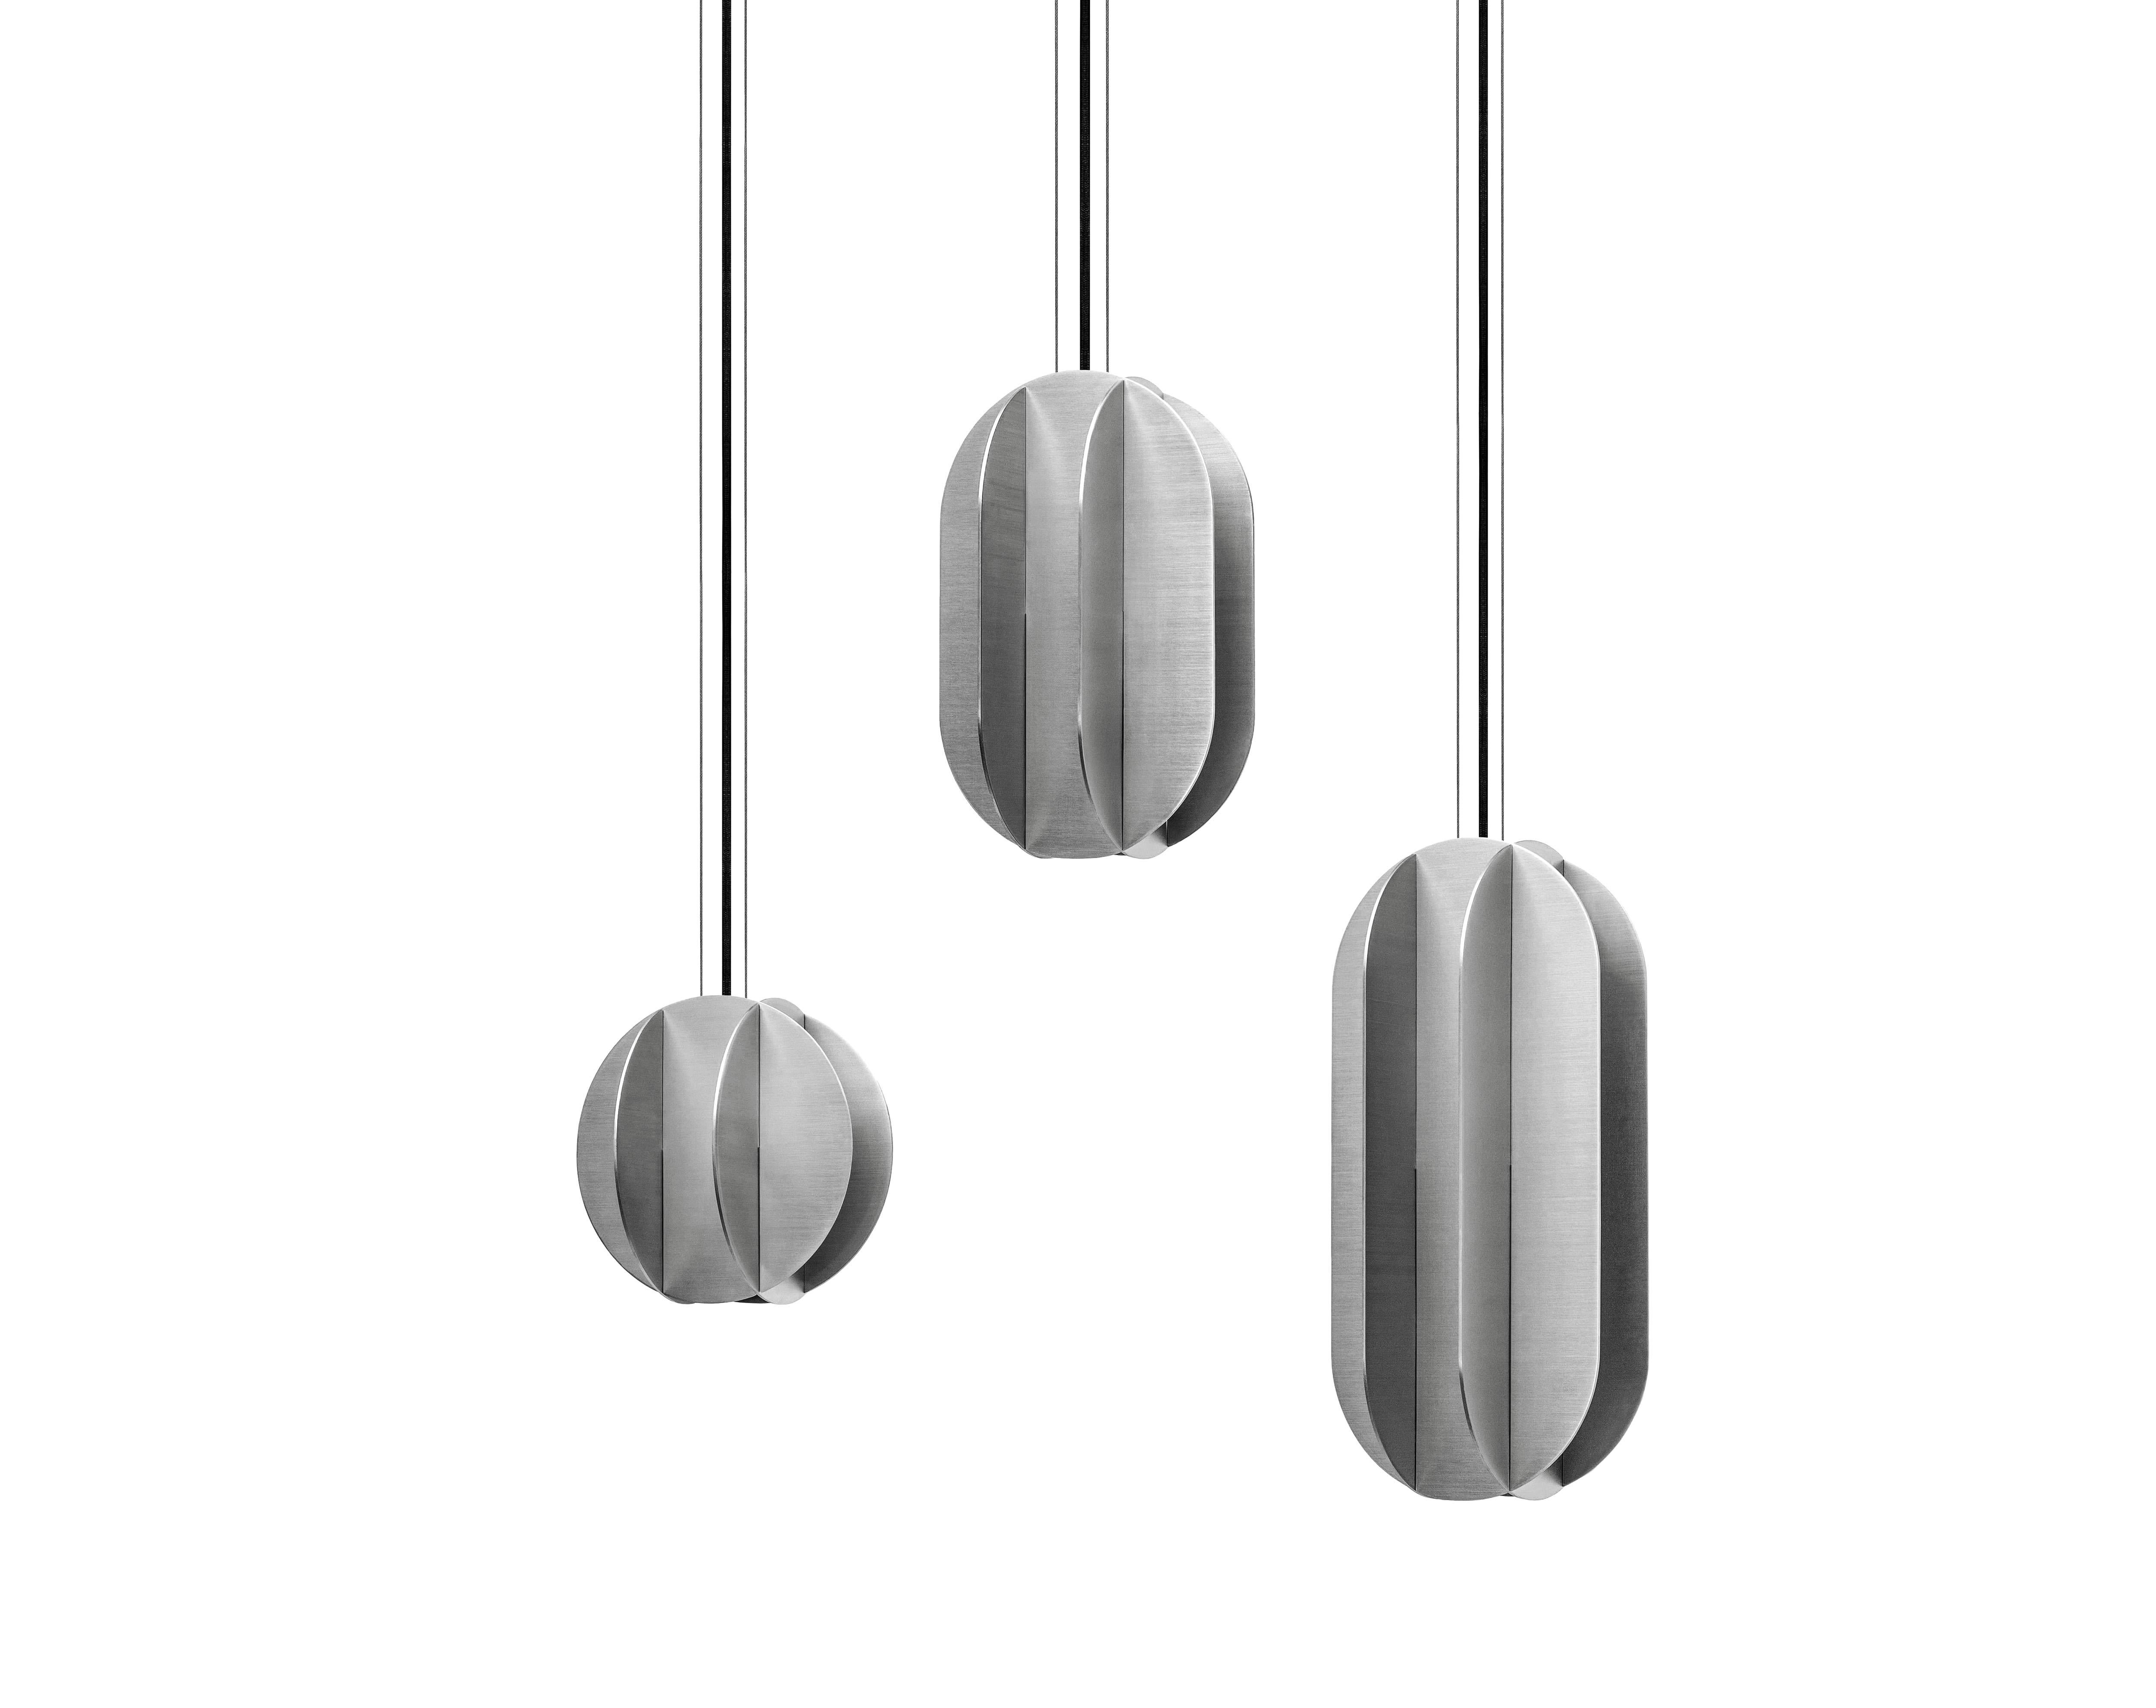 Brushed Contemporary Pendant Lamp EL Lamp small CS3 by NOOM in Stainless Steel